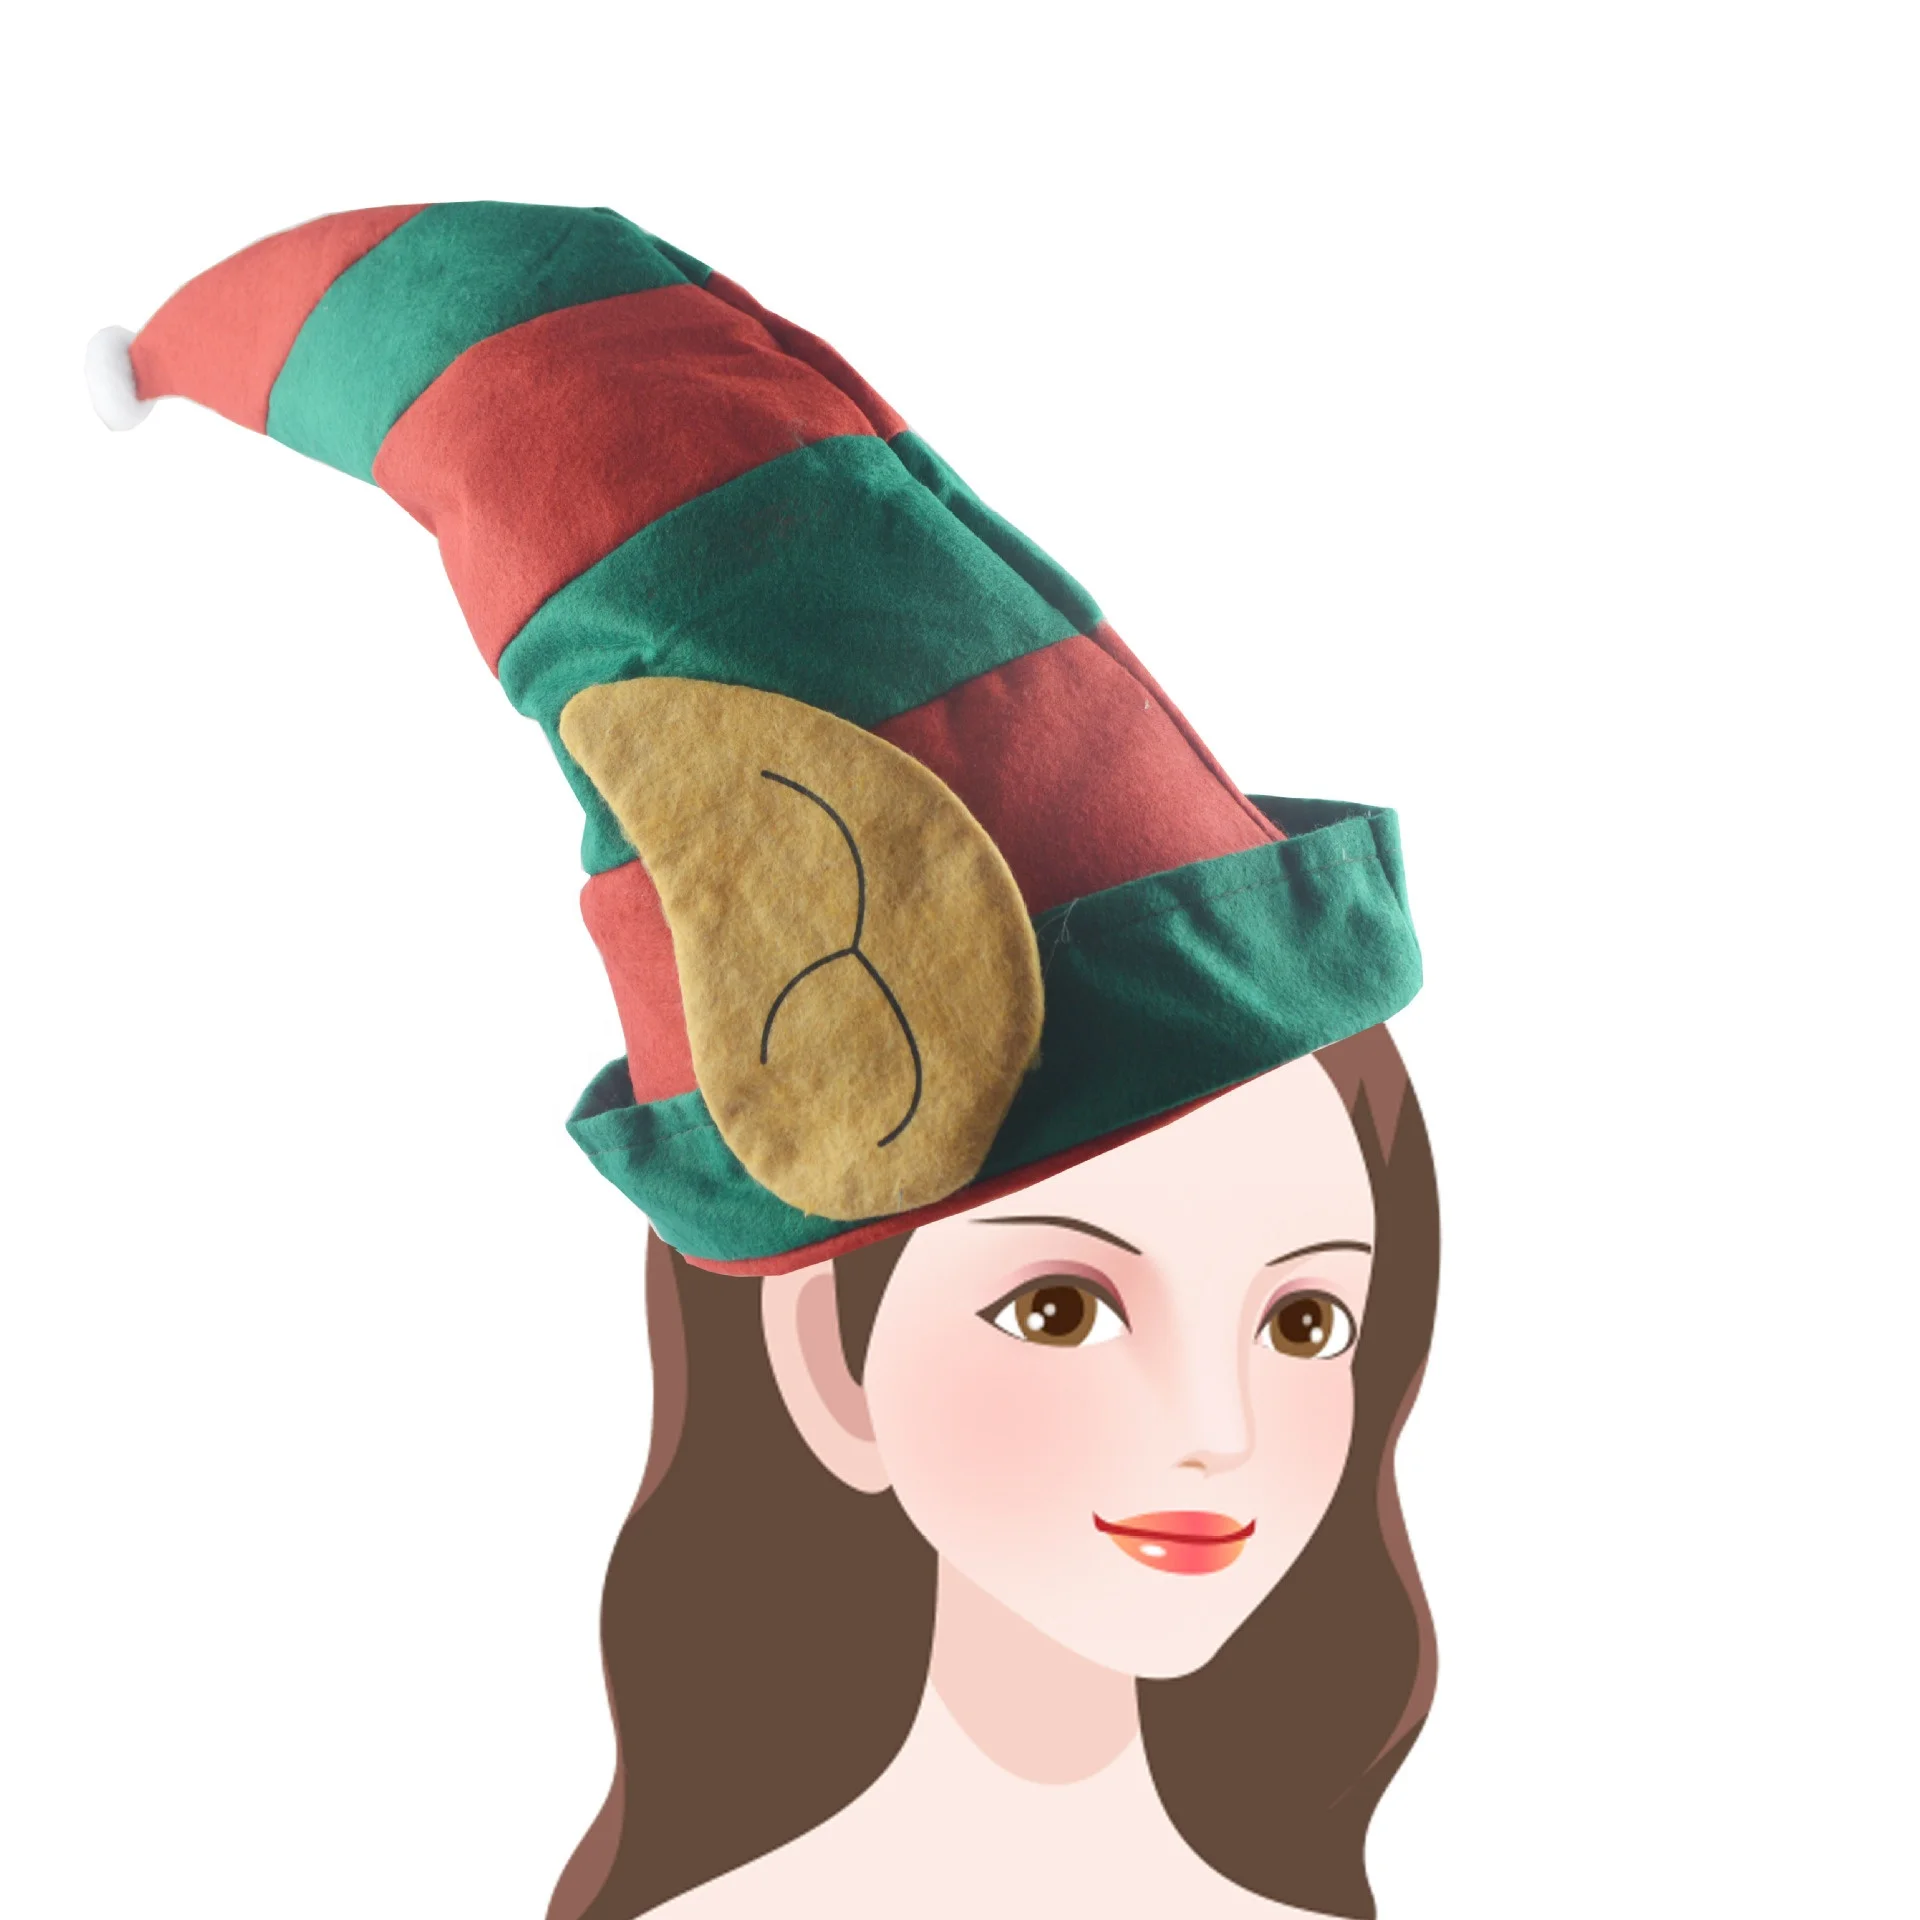 
Funny Christmas Elf Hat with Ears Child Adult Creative Red Green Striped Festival Party Decoration Ornaments 